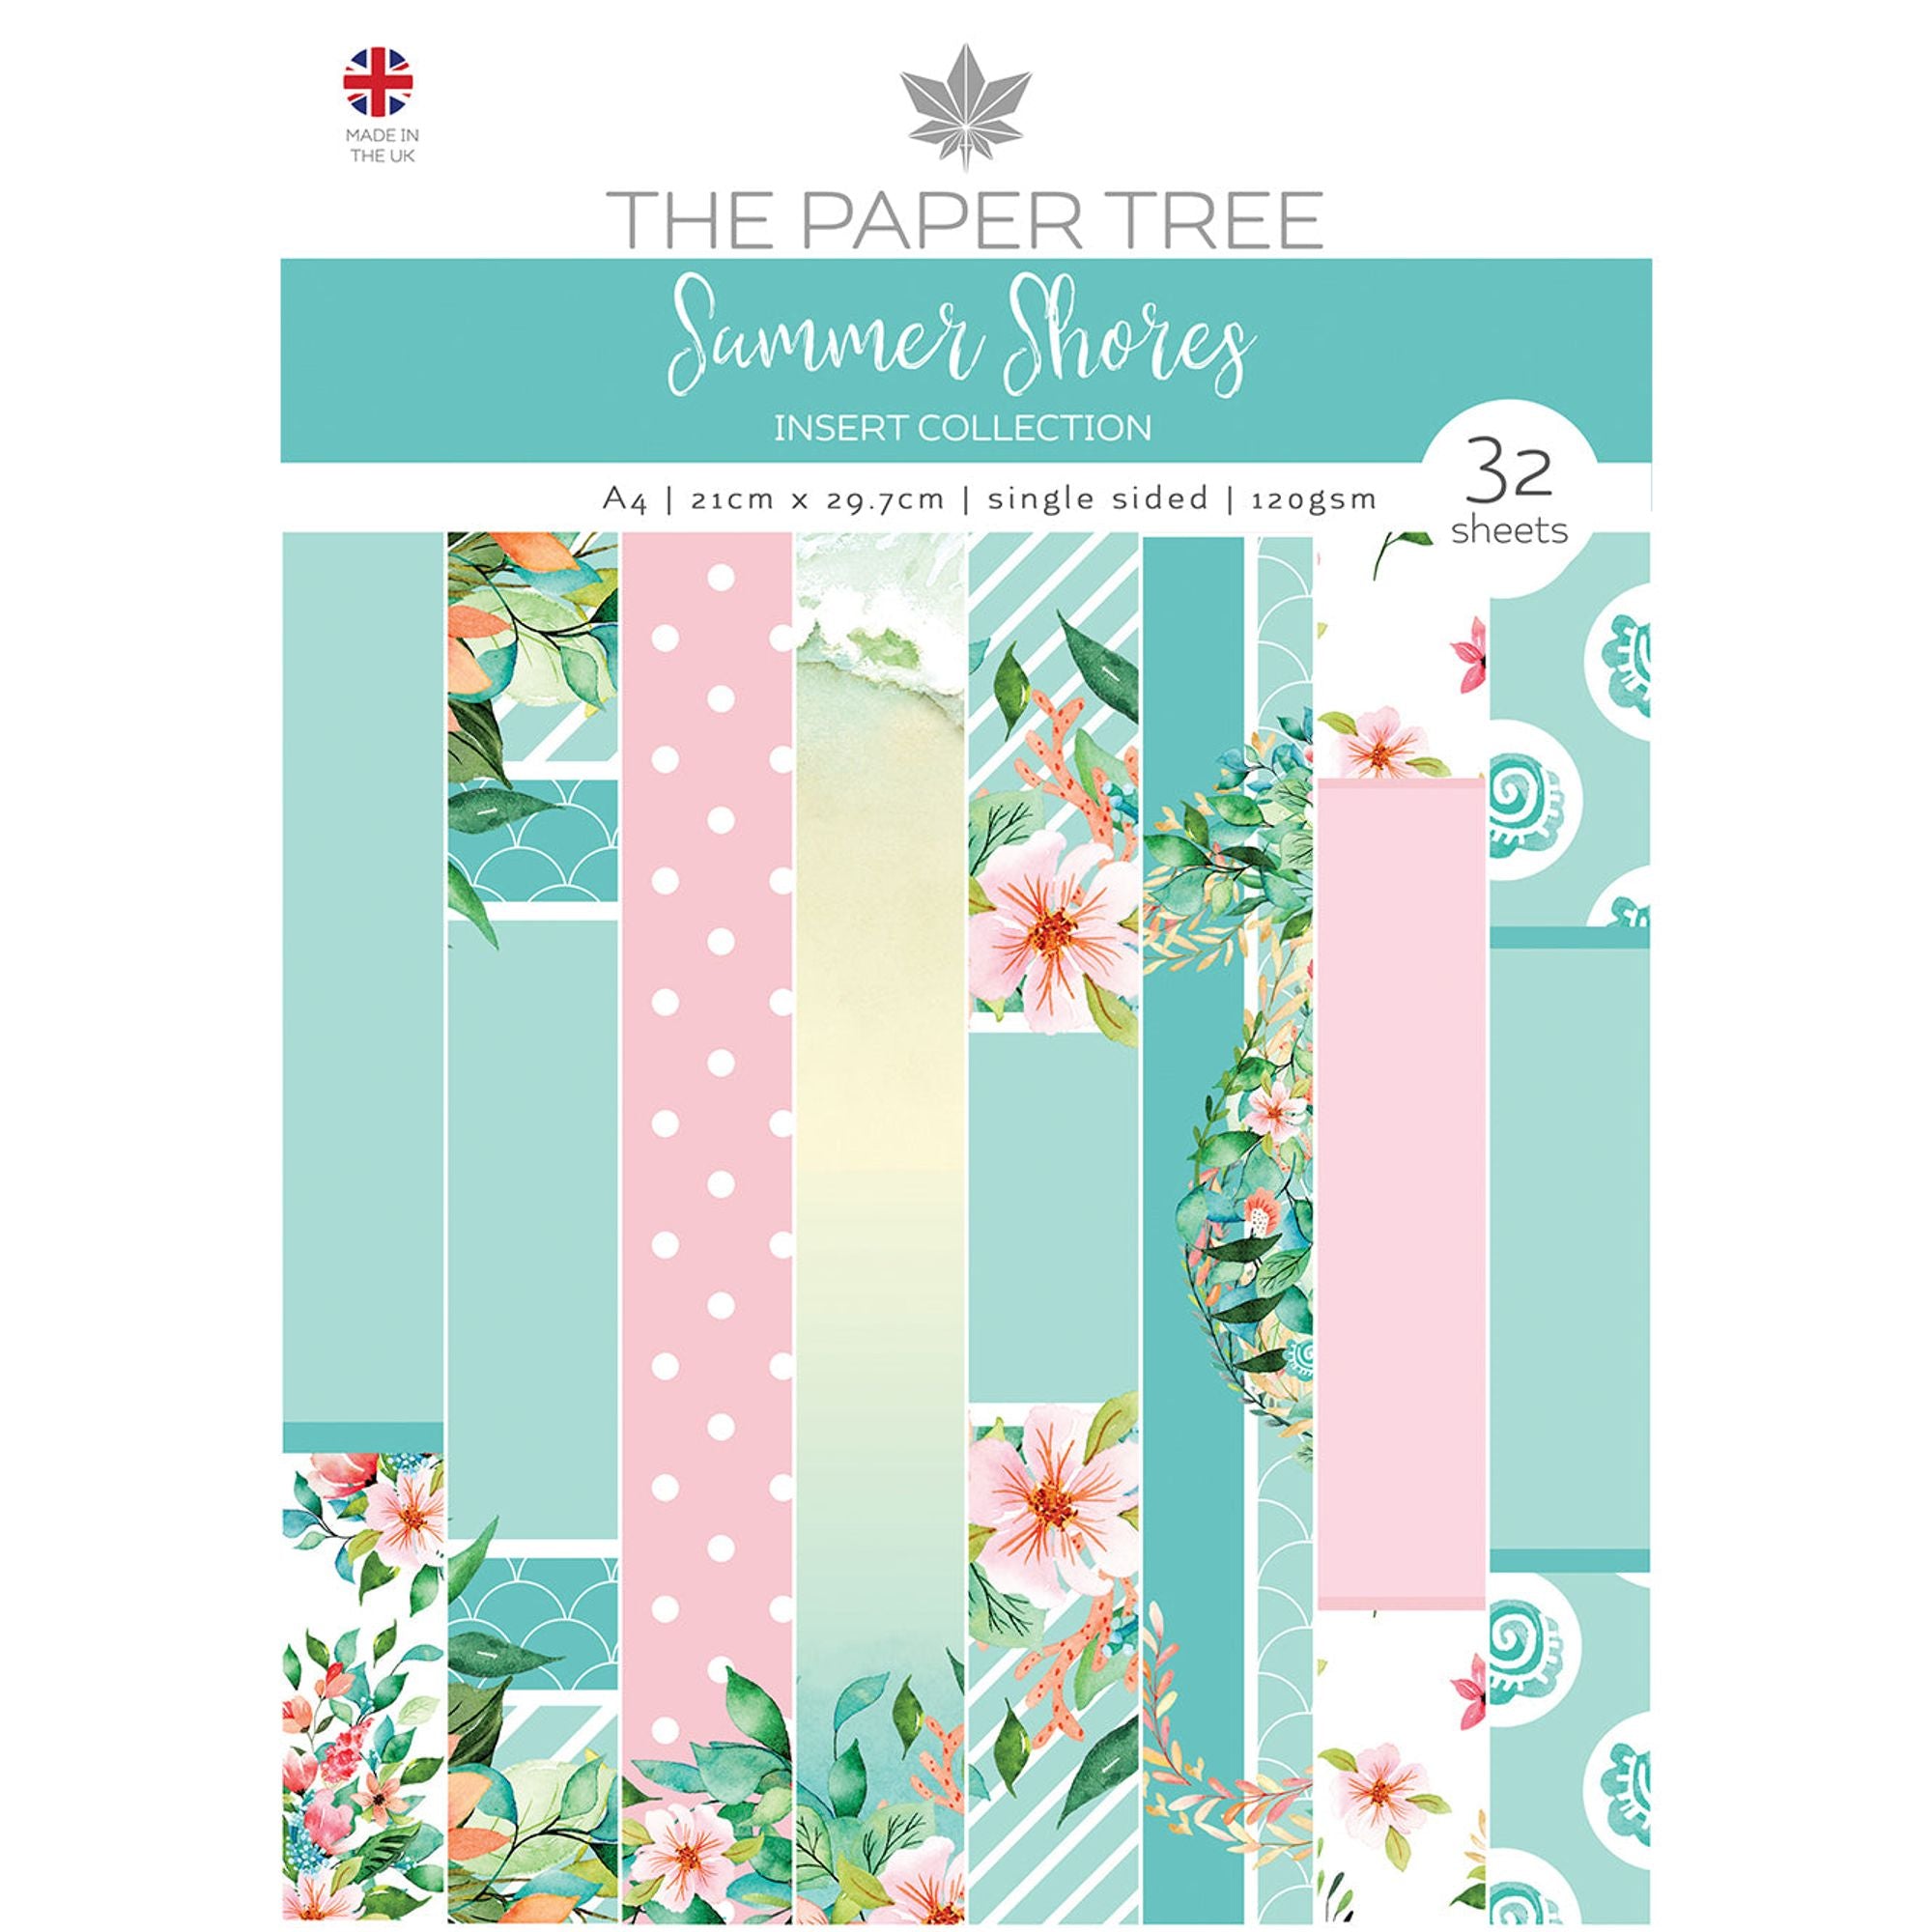 The Paper Tree Summer Shores A4 Insert Collection